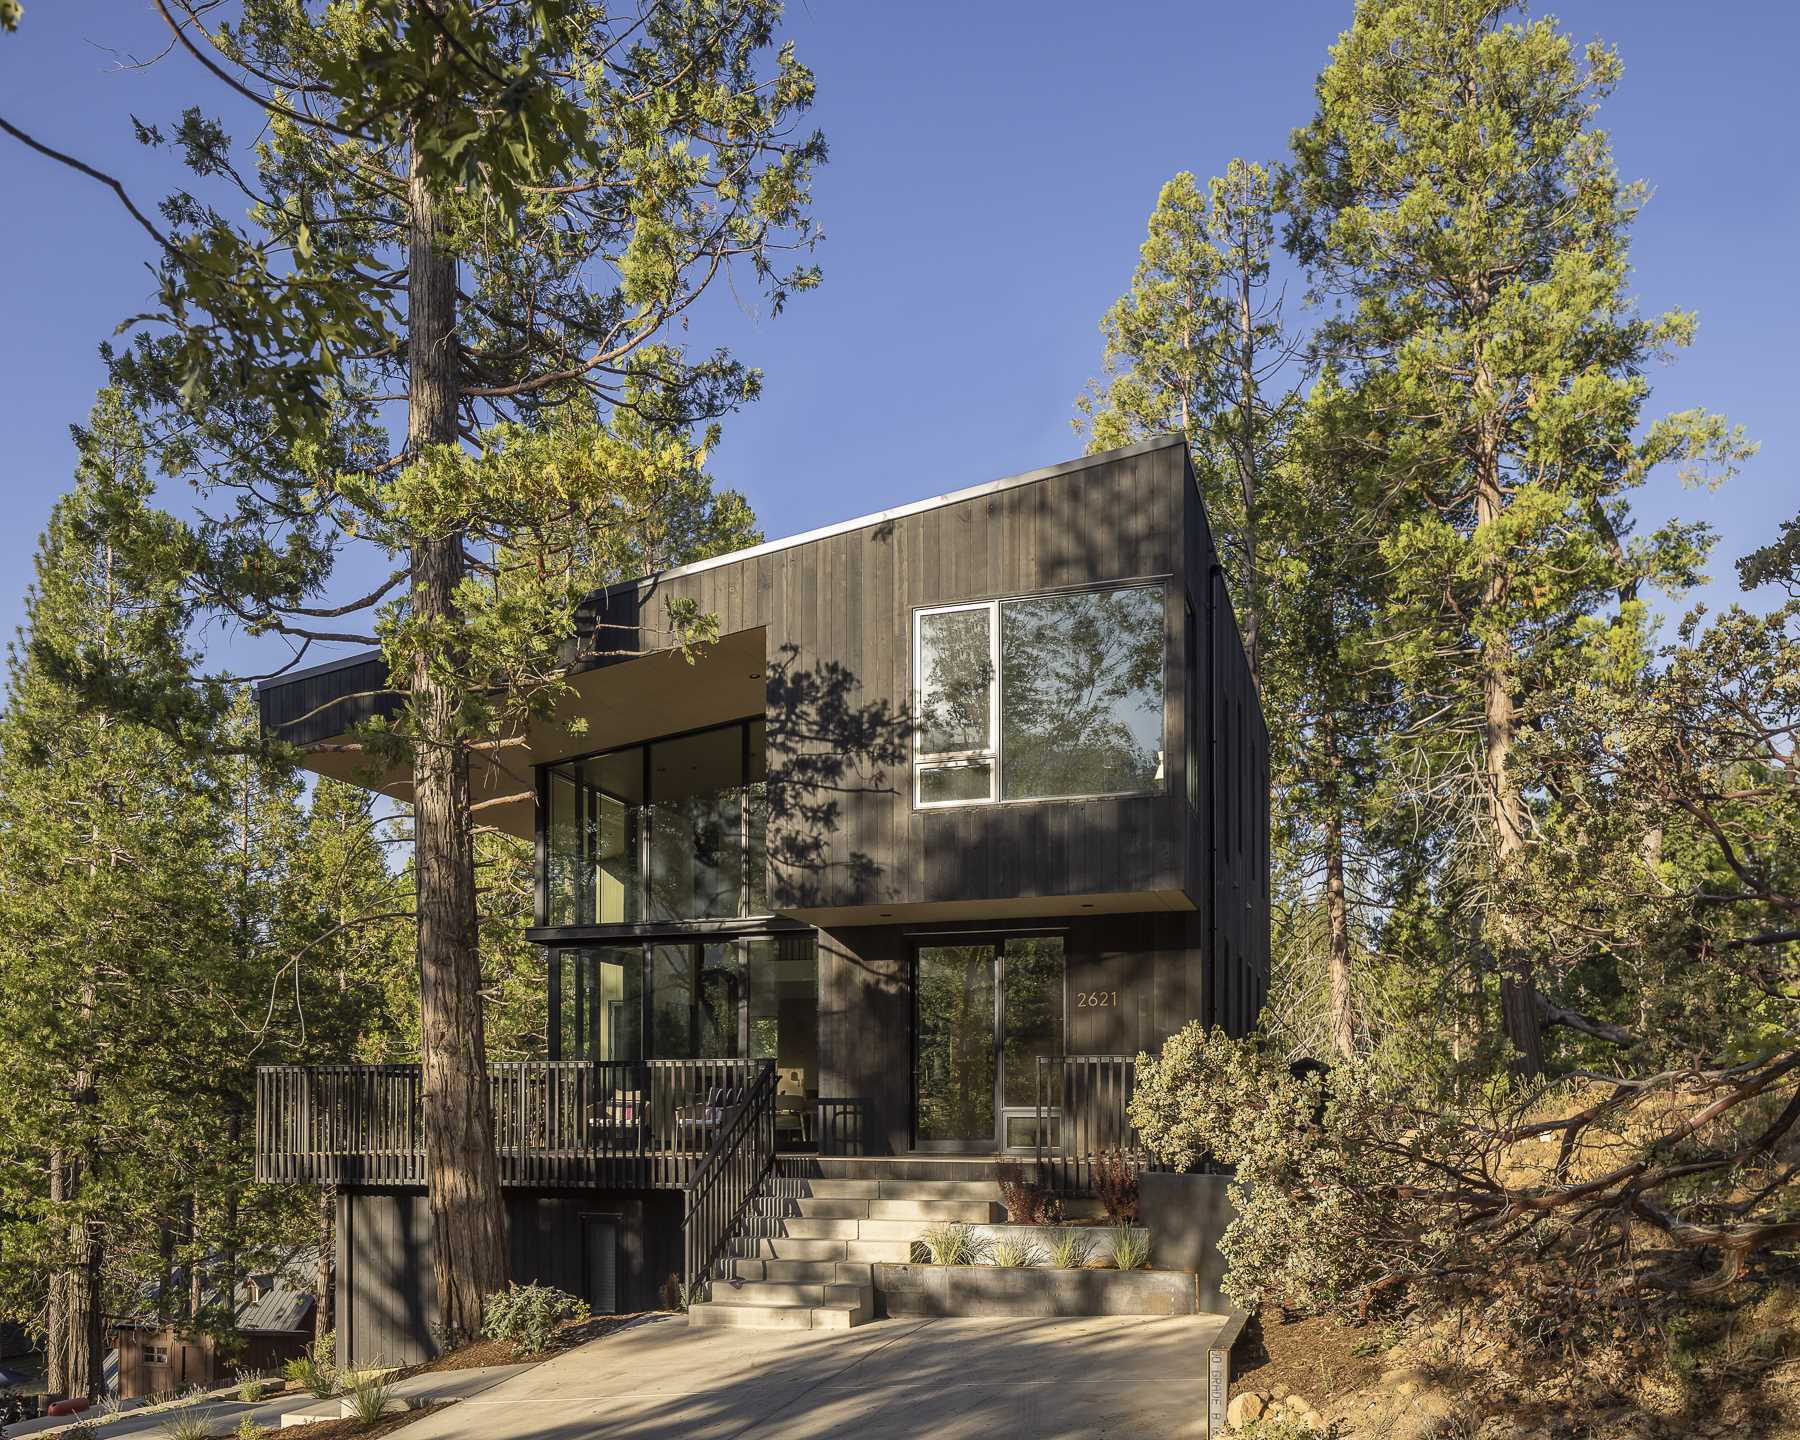 Dark vertical wood siding was chosen as the primary exterior cladding to “camouflage” this home and allow it to blend into the environment as much as possible.